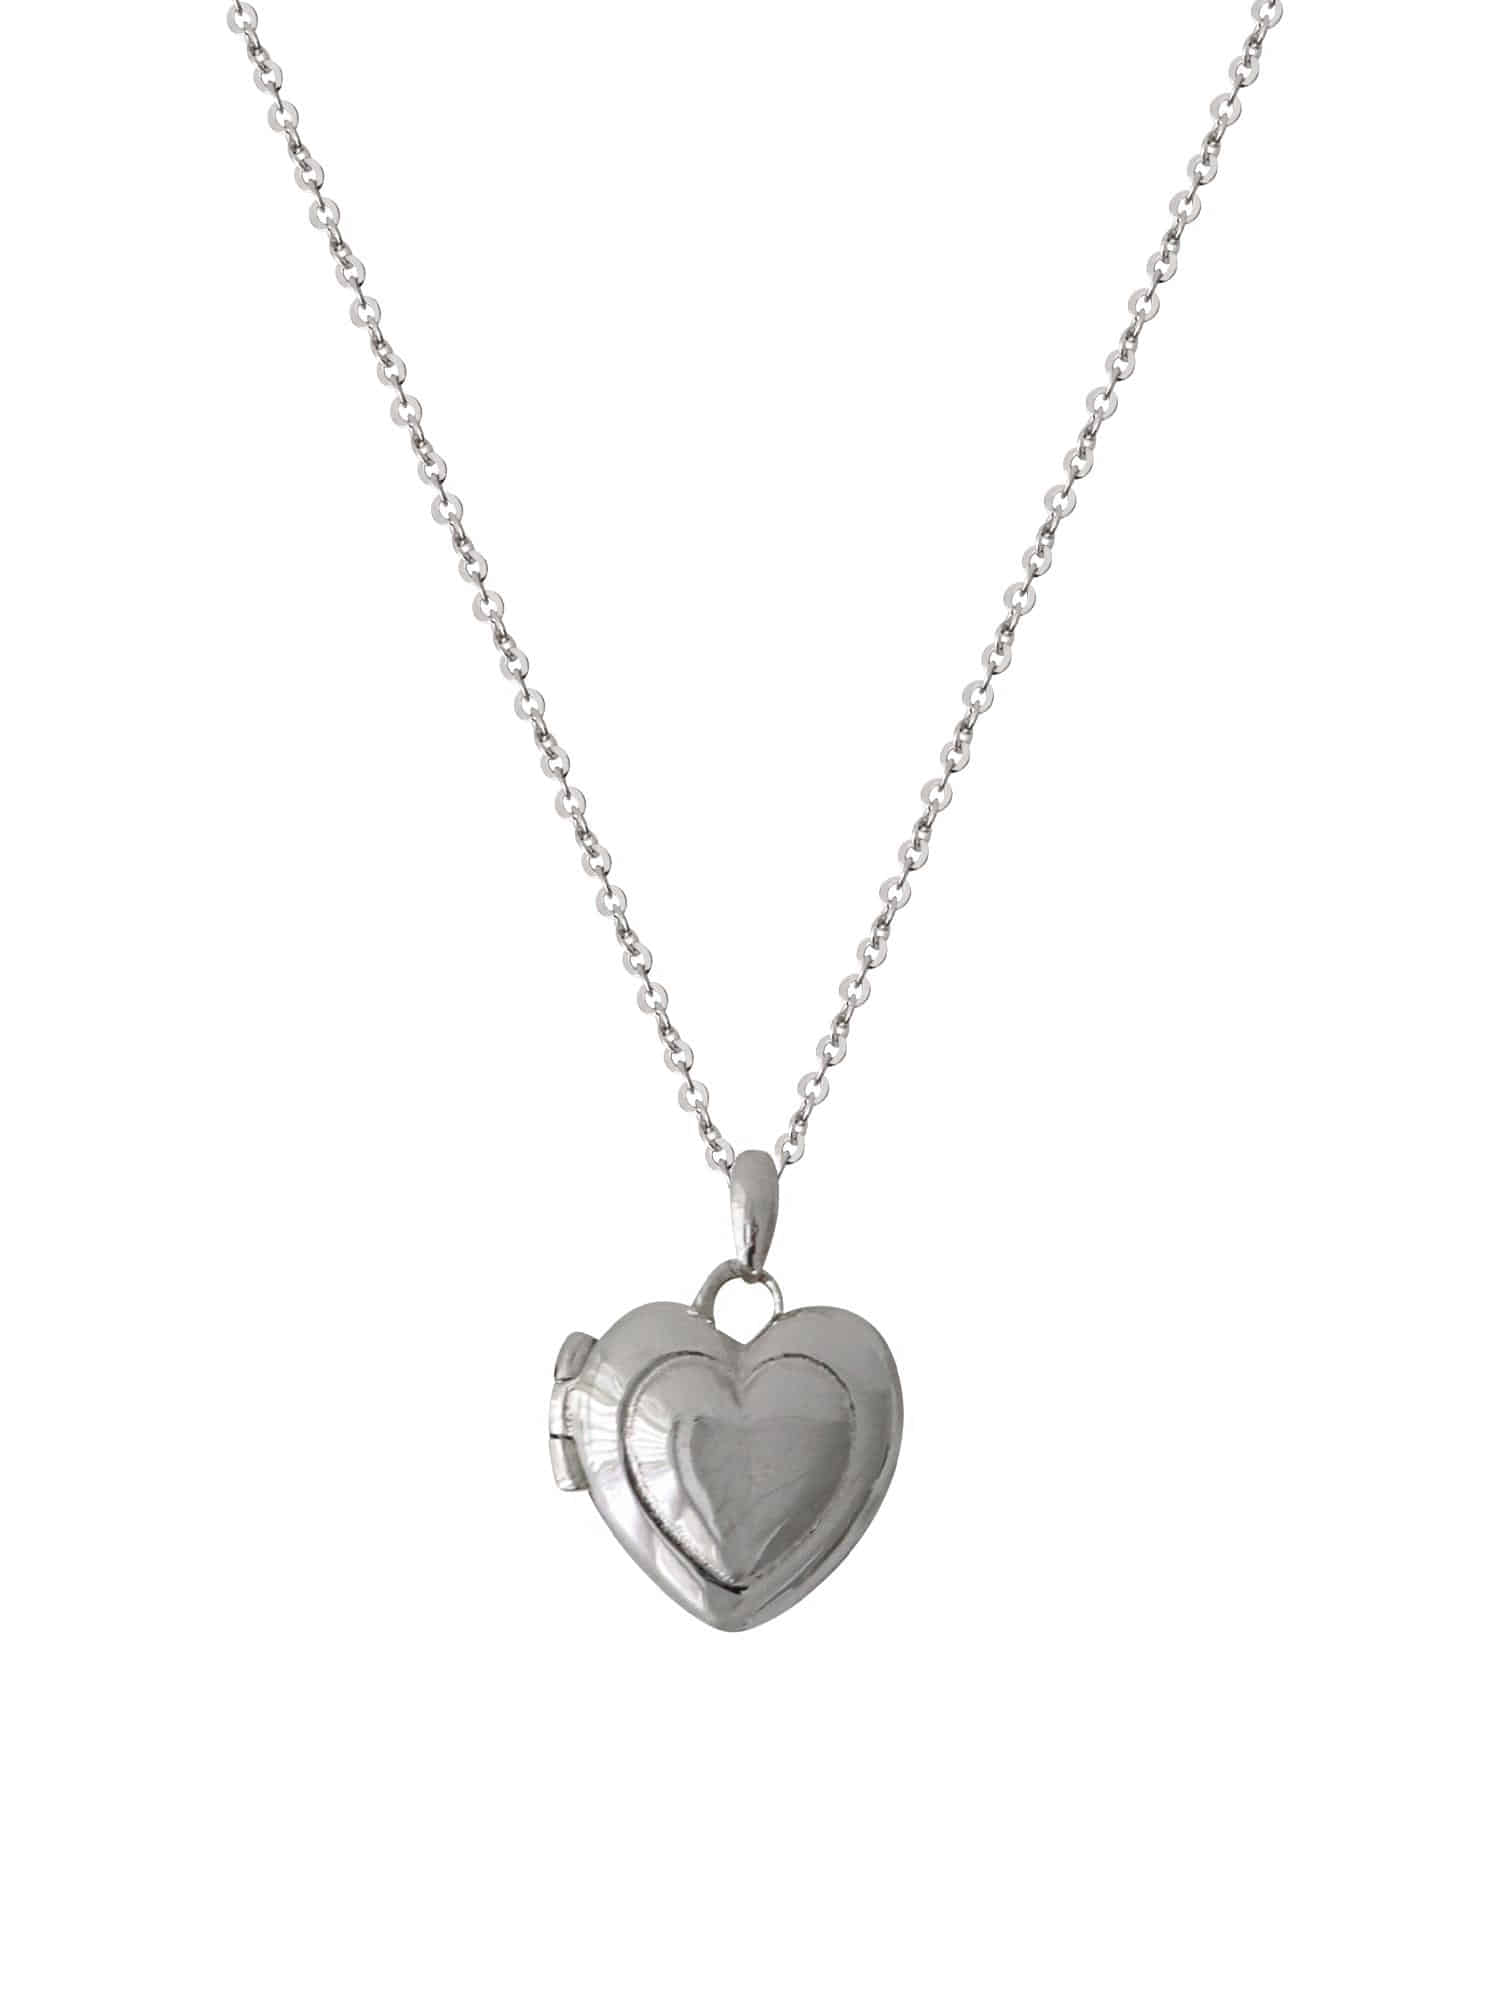 Love myself Necklace ( Silver / Polished )